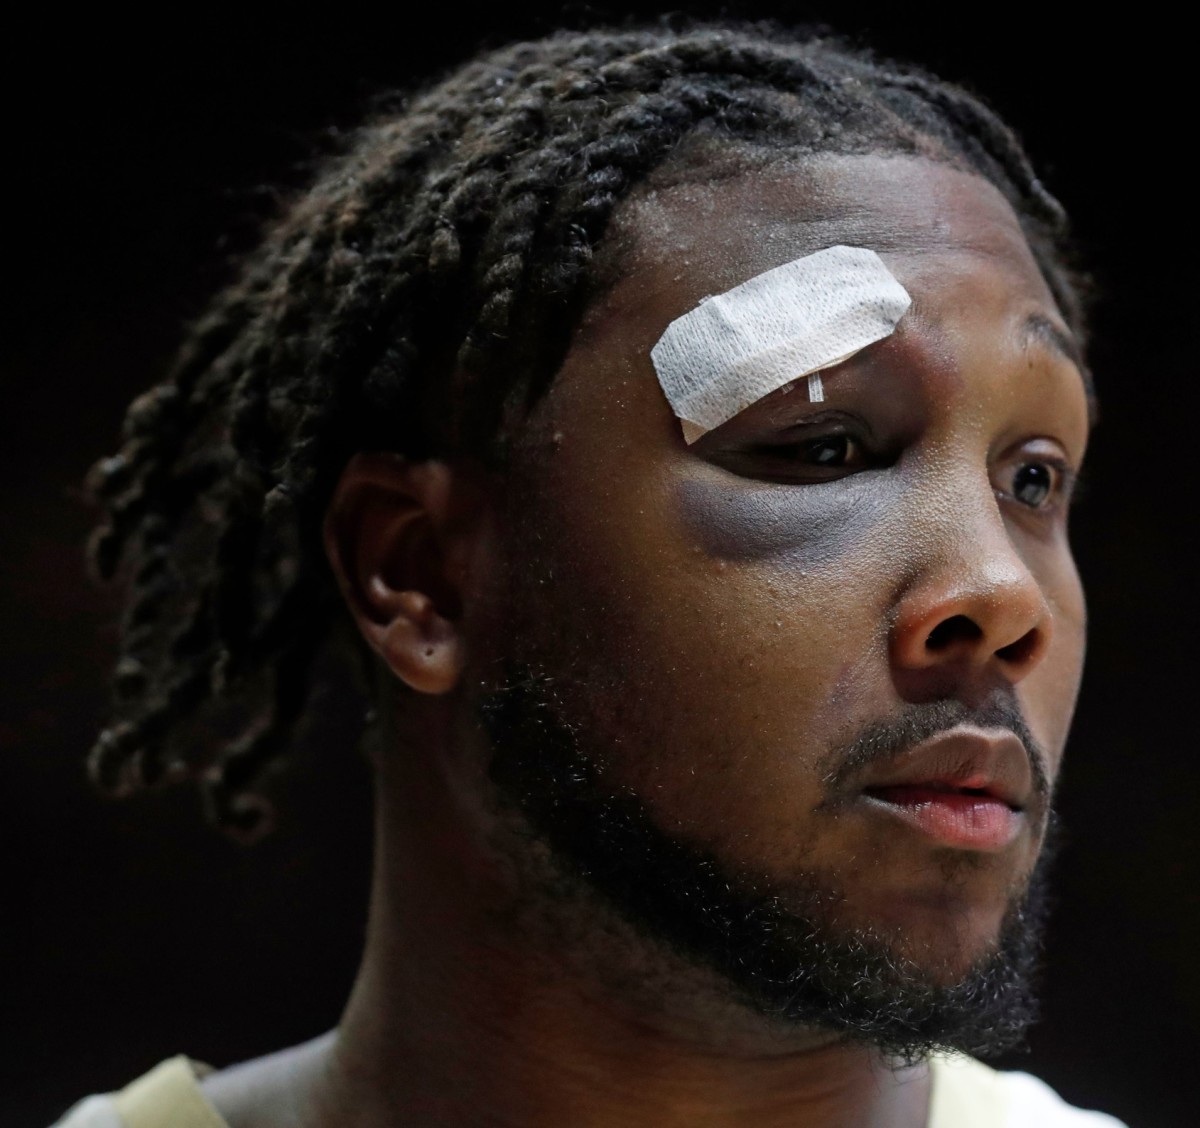 Purdue Boilermakers guard David Jenkins Jr. (14) is subbed onto the court during NCAA men s basketball game against the Austin Peay Governors, Friday, Nov. 11, 2022, at Mackey Arena in West Lafayette, Ind.